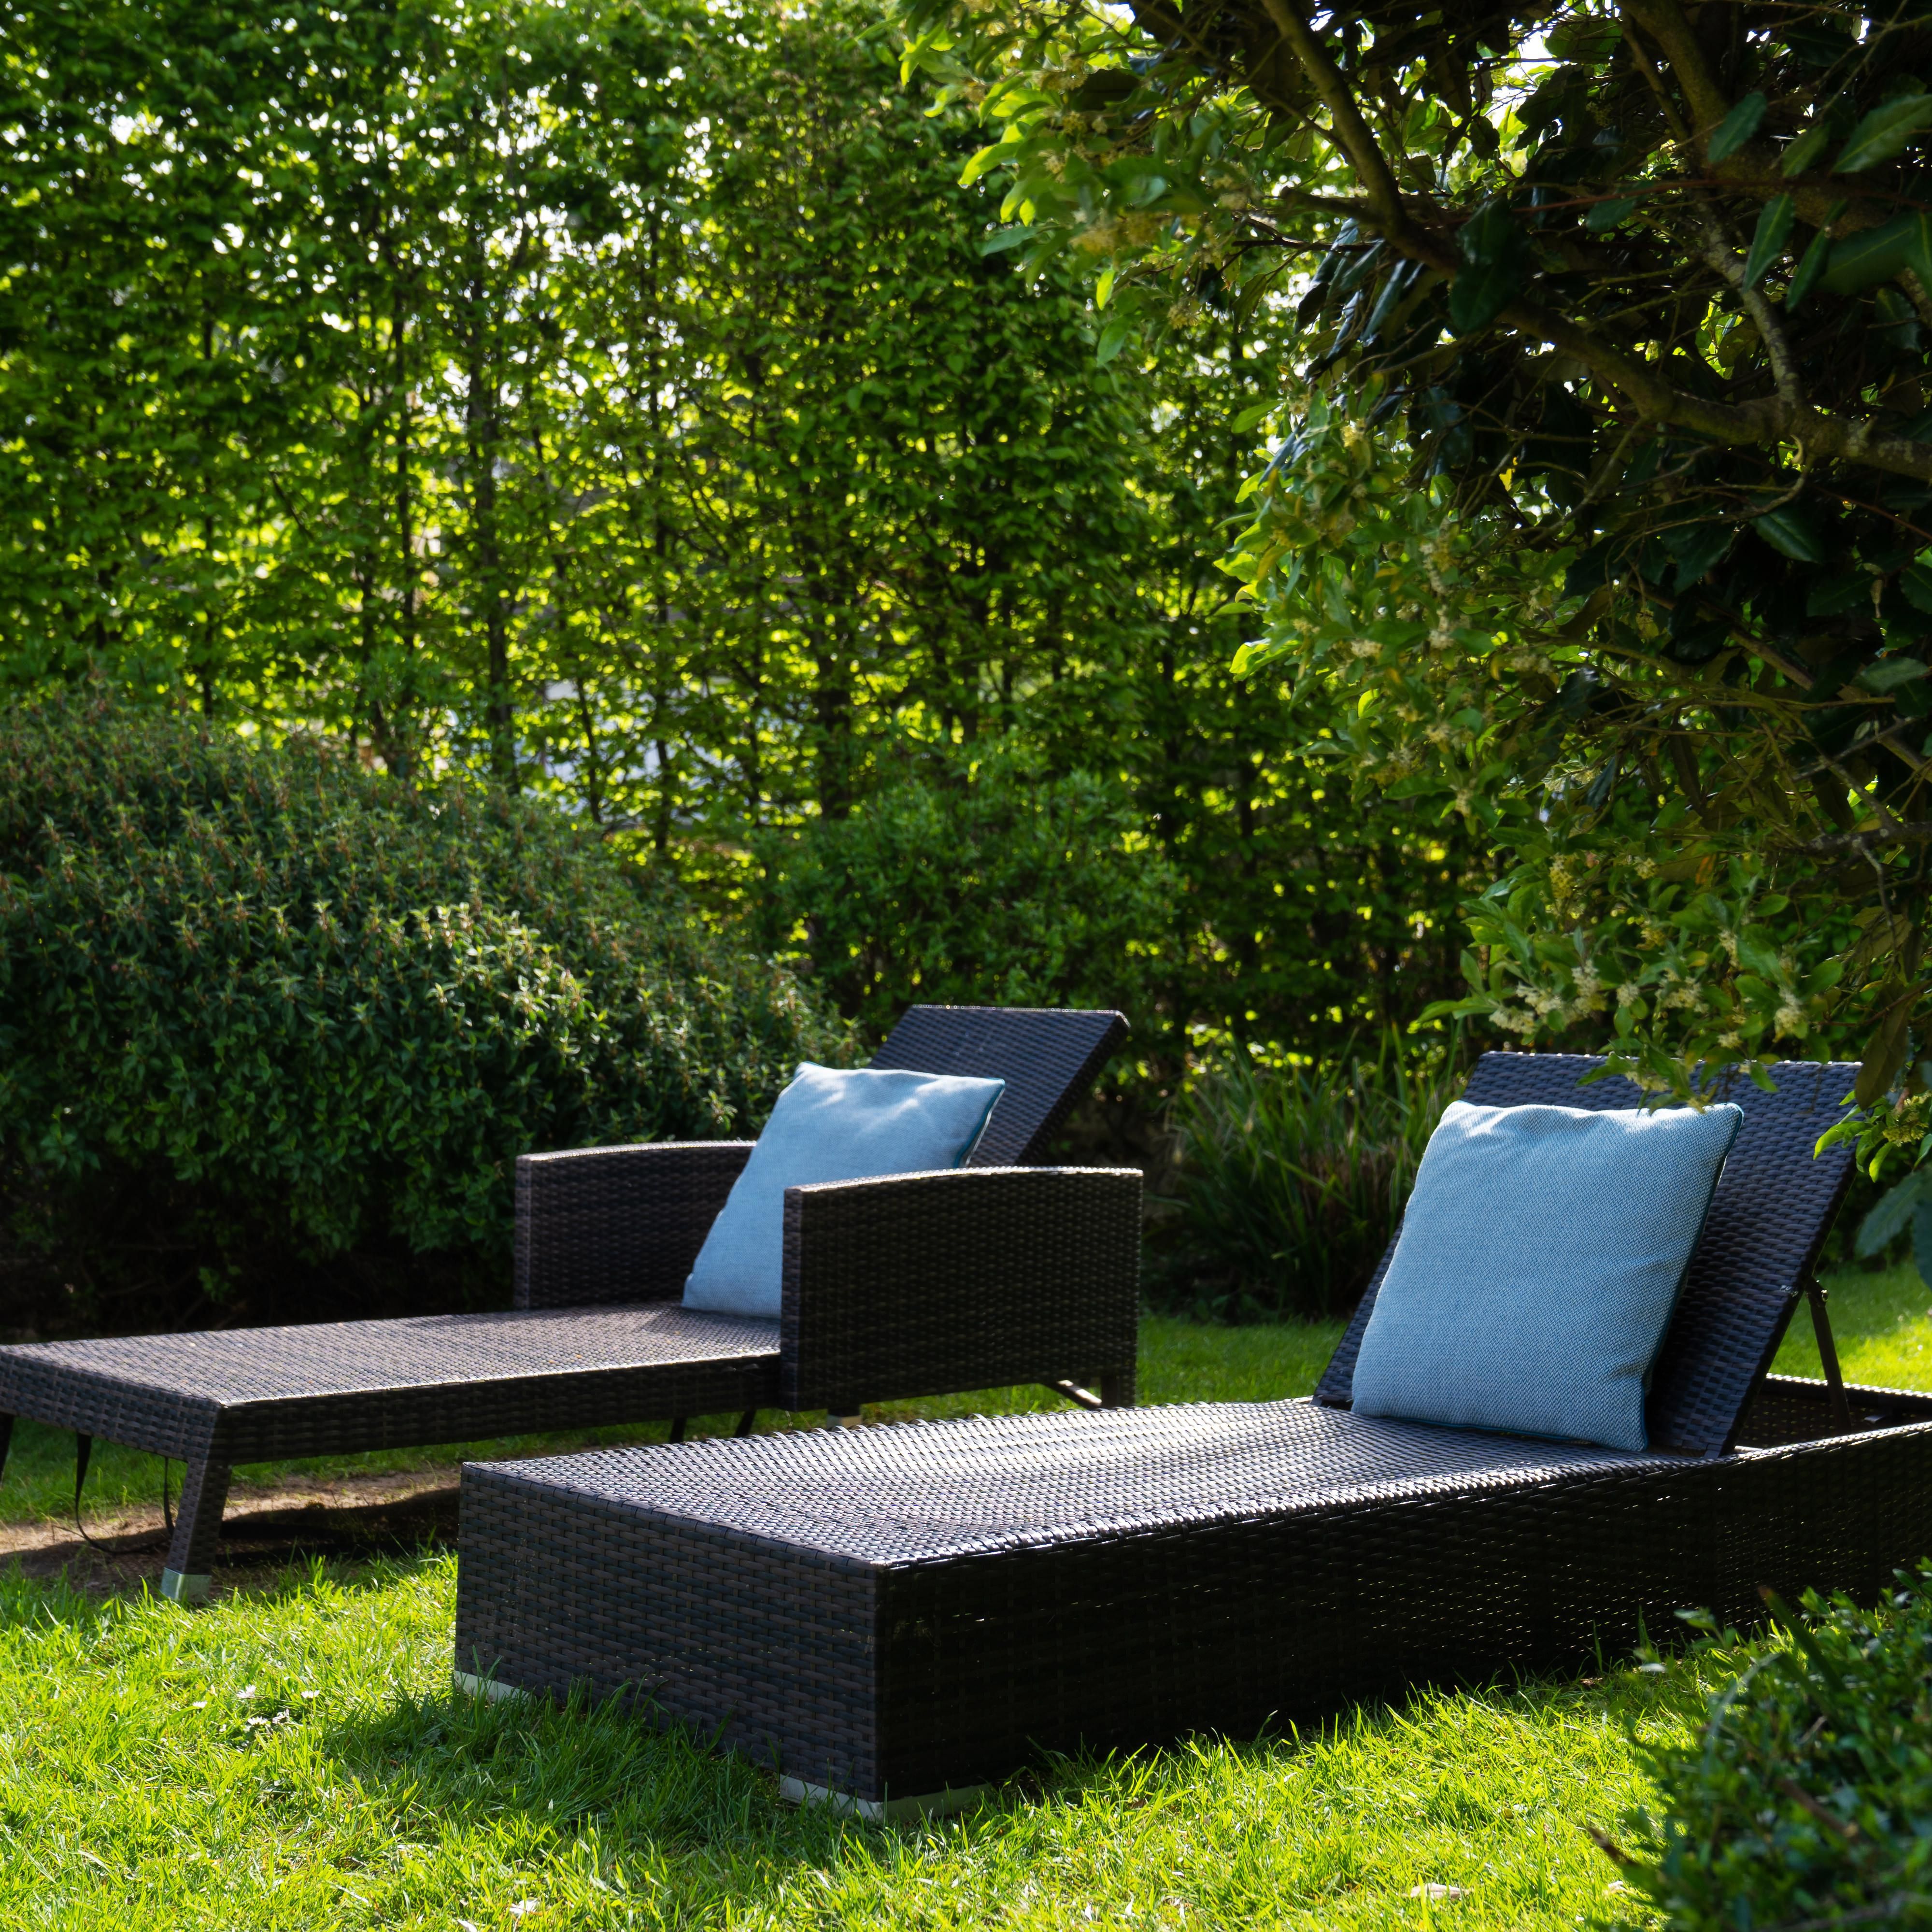 Secluded loungers in our garden for guest to relax on.